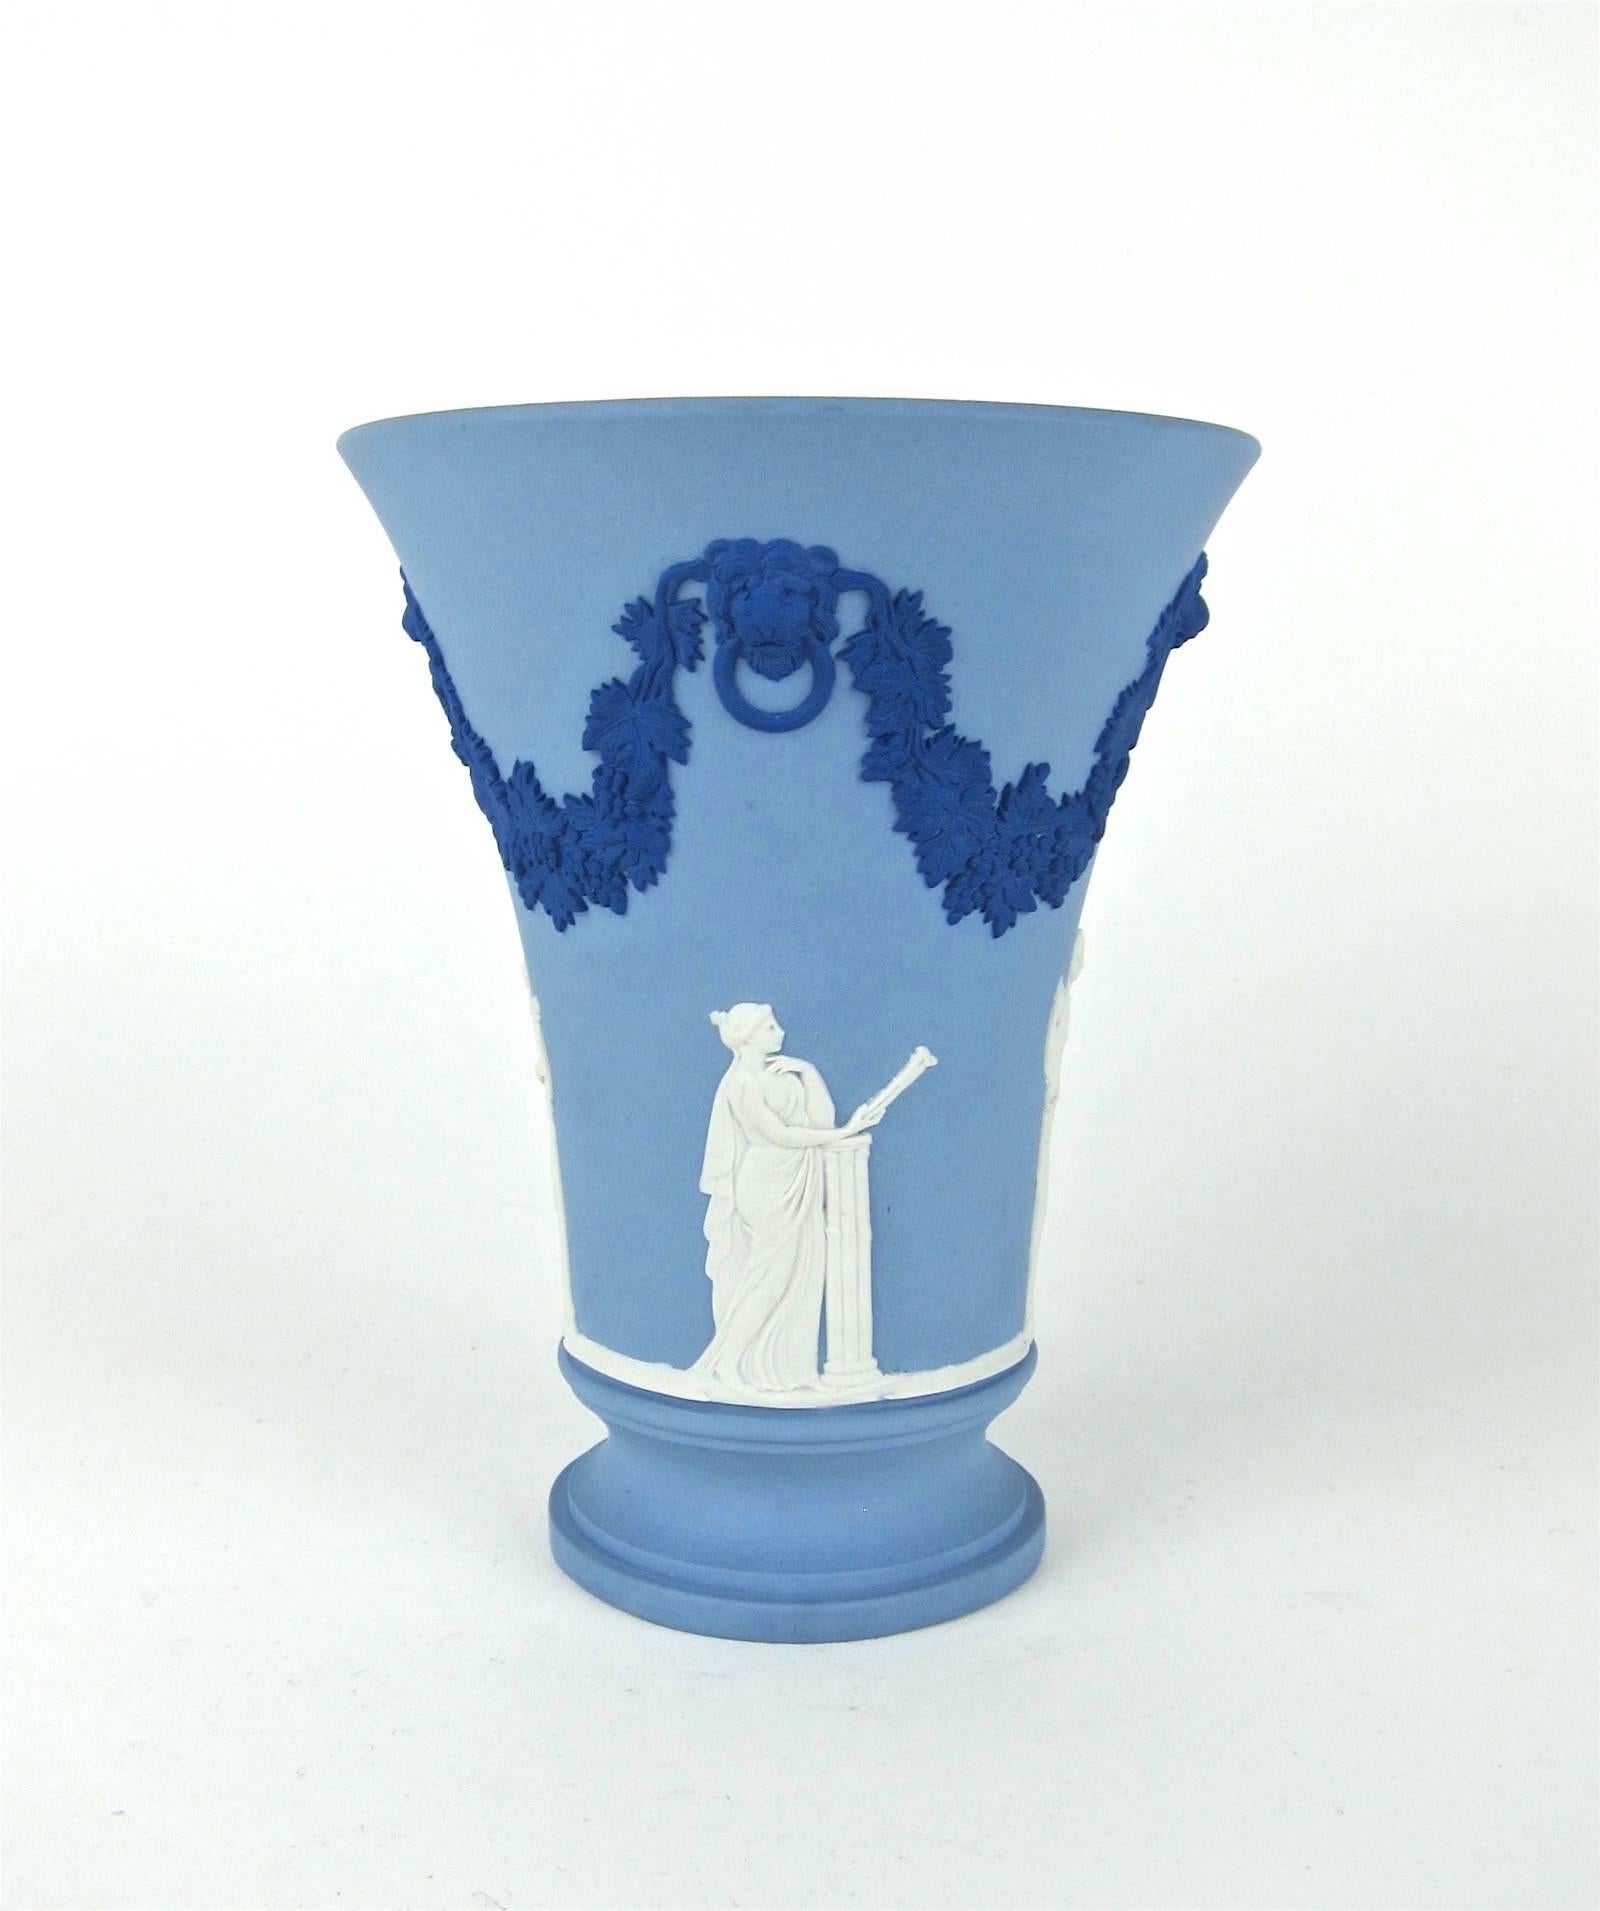 A handsome flaring vase in tri-color jasperware from Wedgwood of England, signed by Lord Wedgwood in 1988. The vase is a solid pale blue with neoclassical bas-relief ornament of grapevine festoons and lion heads in a darker Portland Blue over four